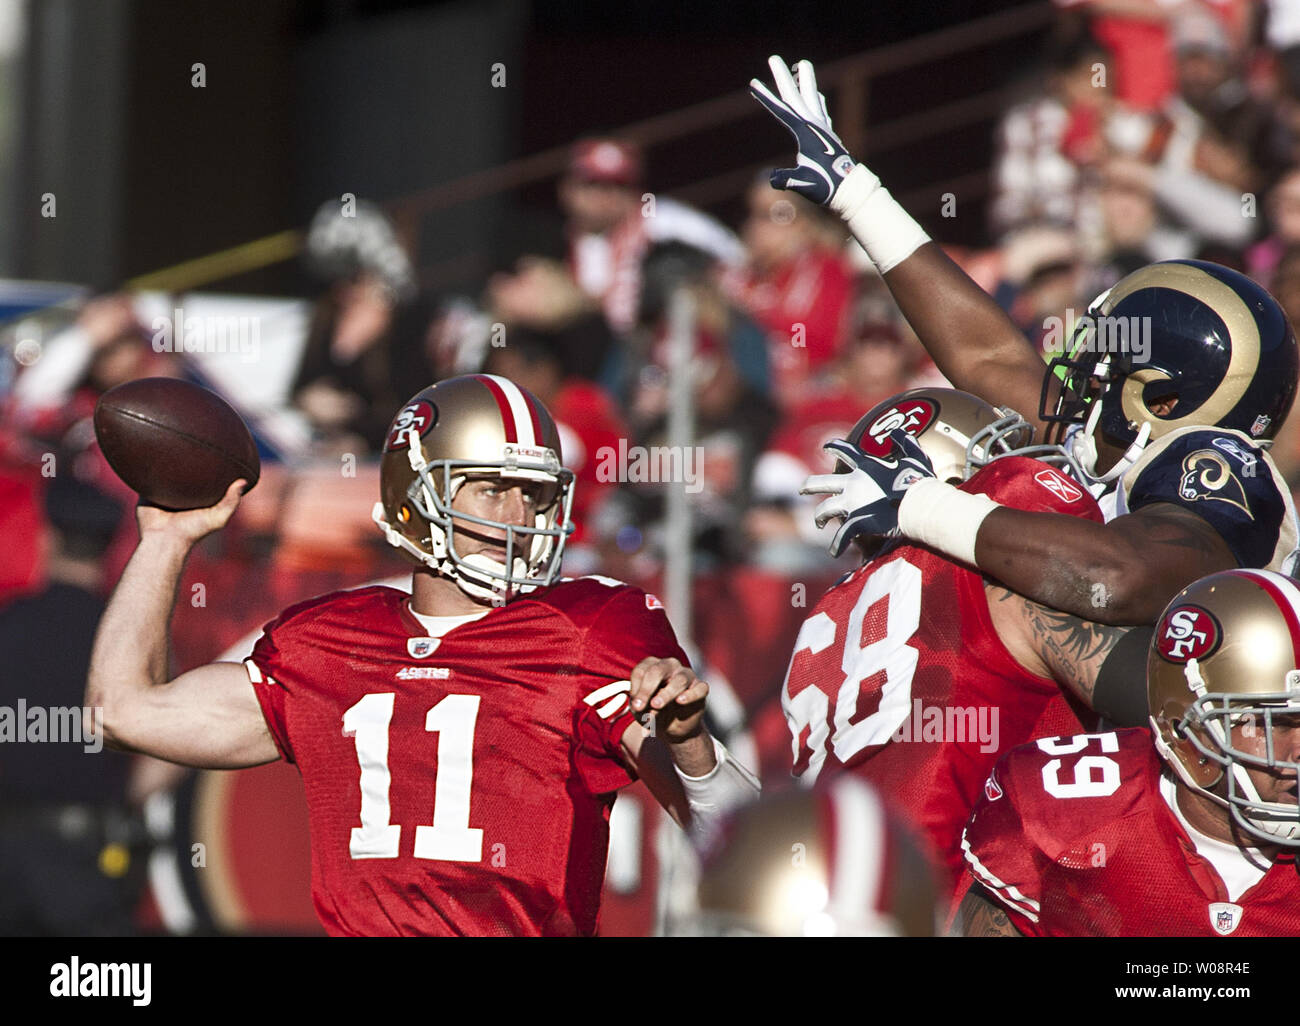 San Francisco 49ers QB Alex Smith (11) takes aim on a pass against the St. Louis Rams at Candlestick Park in San Francisco on December 4, 2011. The 49ers defeated the Rams 26-0 to clinch the NFC West.  UPI/Terry Schmitt Stock Photo